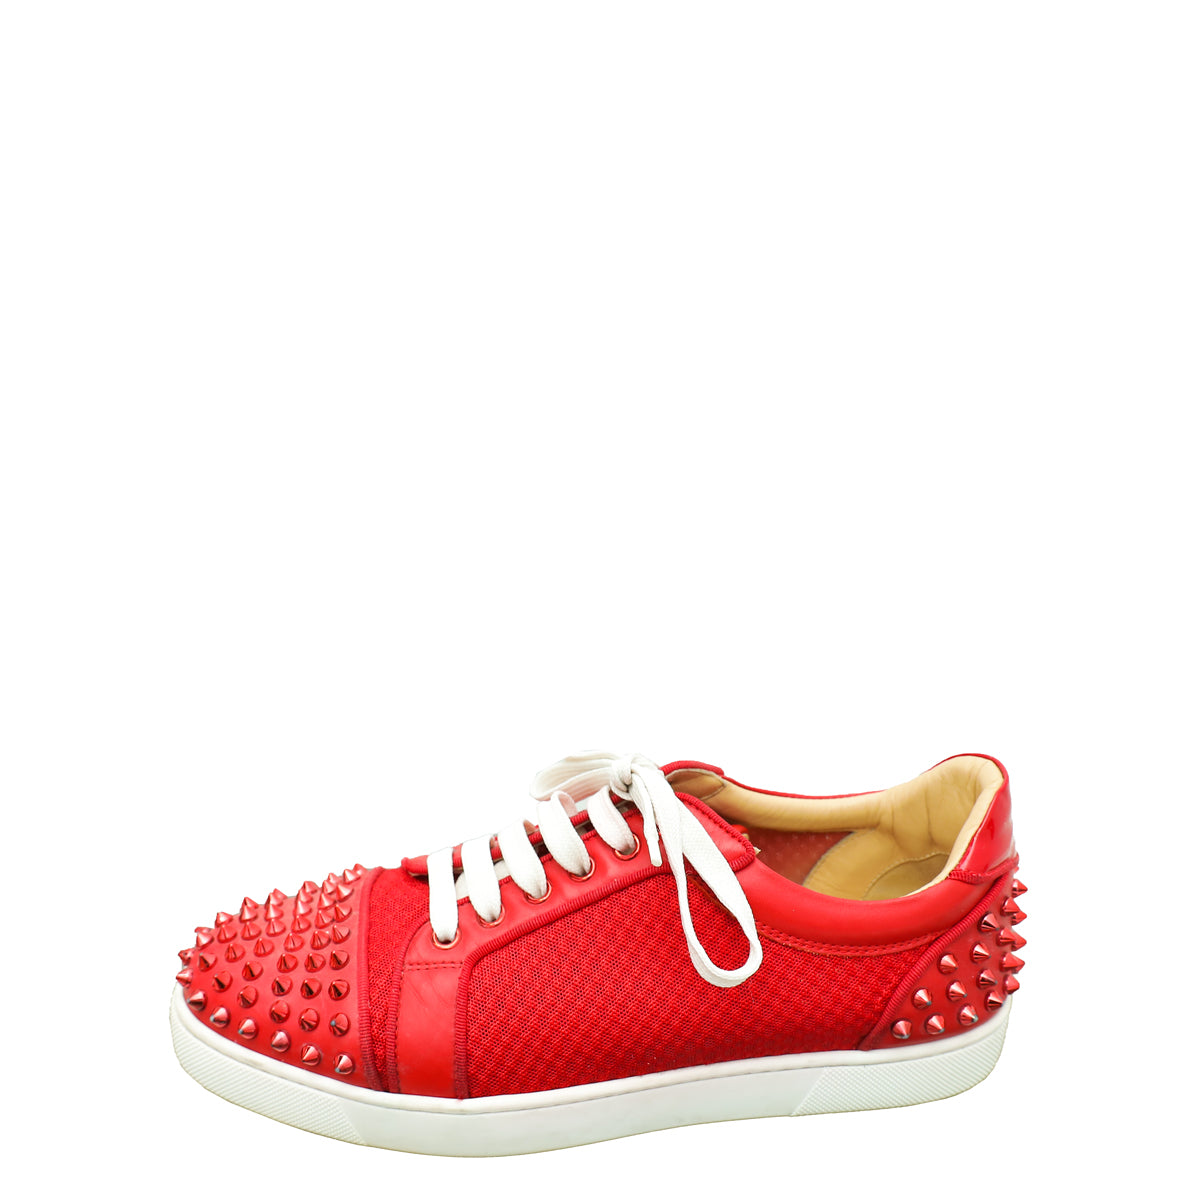 Christian Louboutin Red Vieira 2 Spikes Low Top Sneakers 40